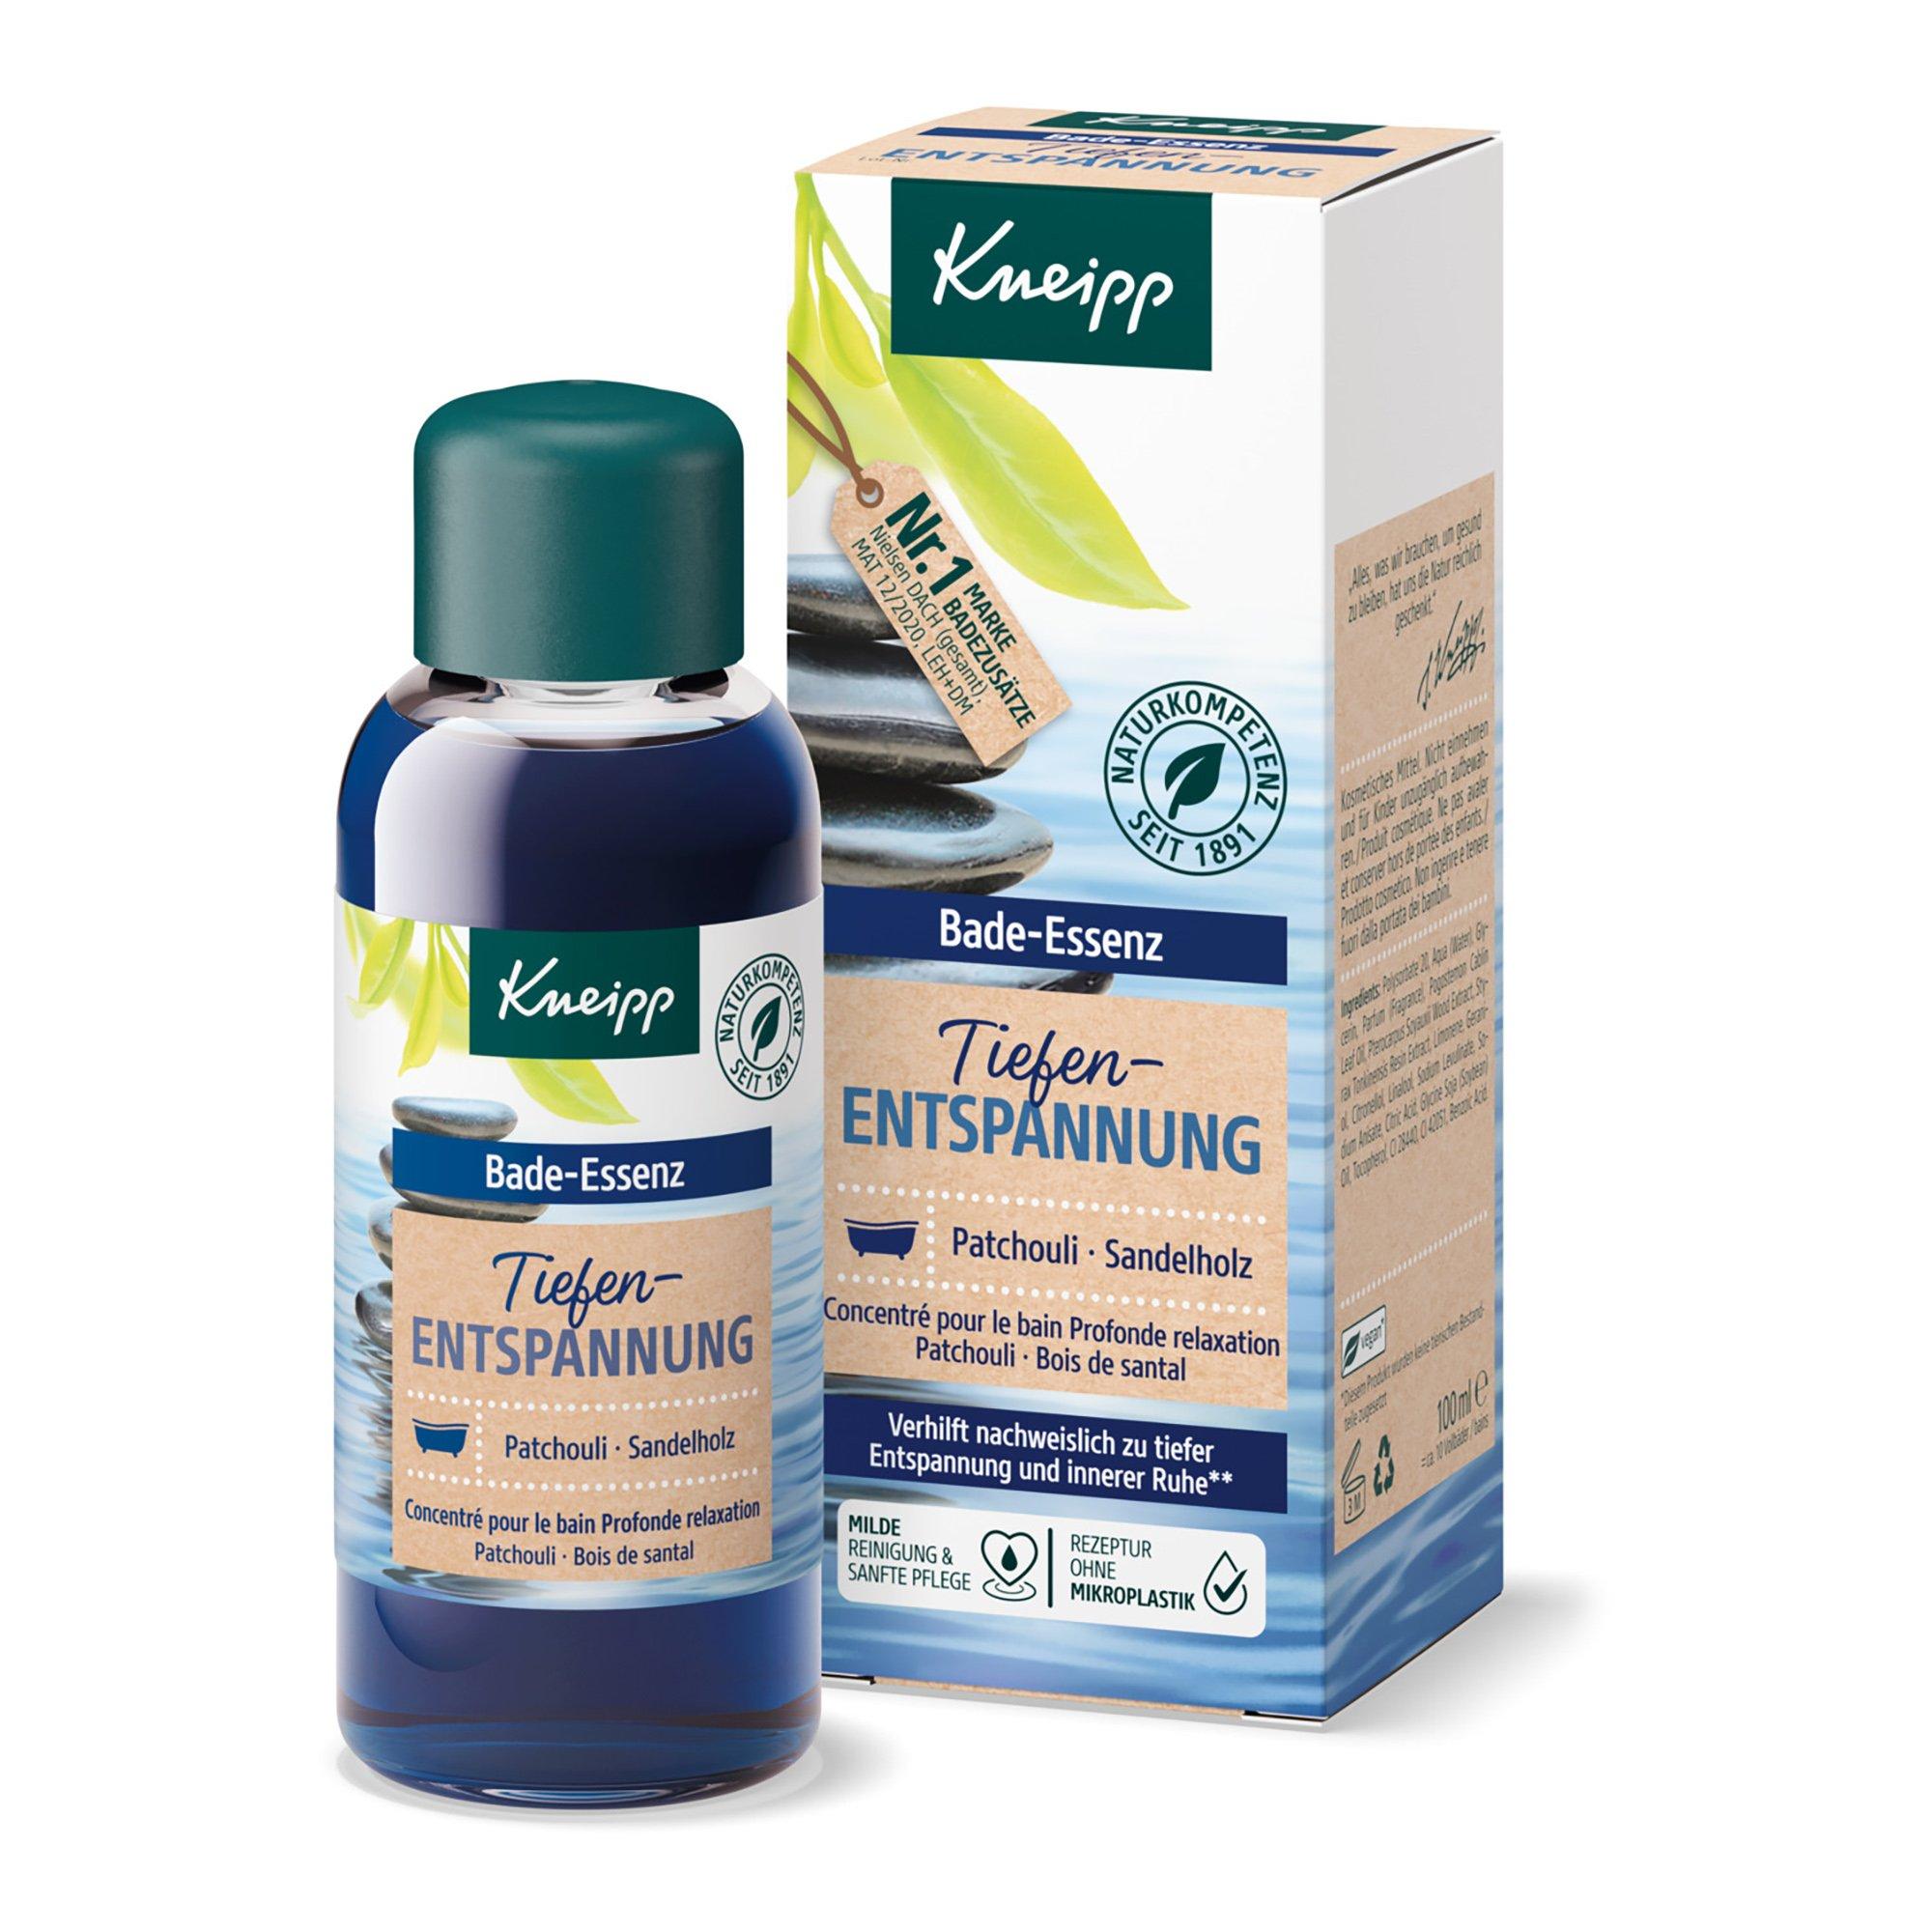 Image of Kneipp Bade-Essenz Tiefenentspannung - 100 ml